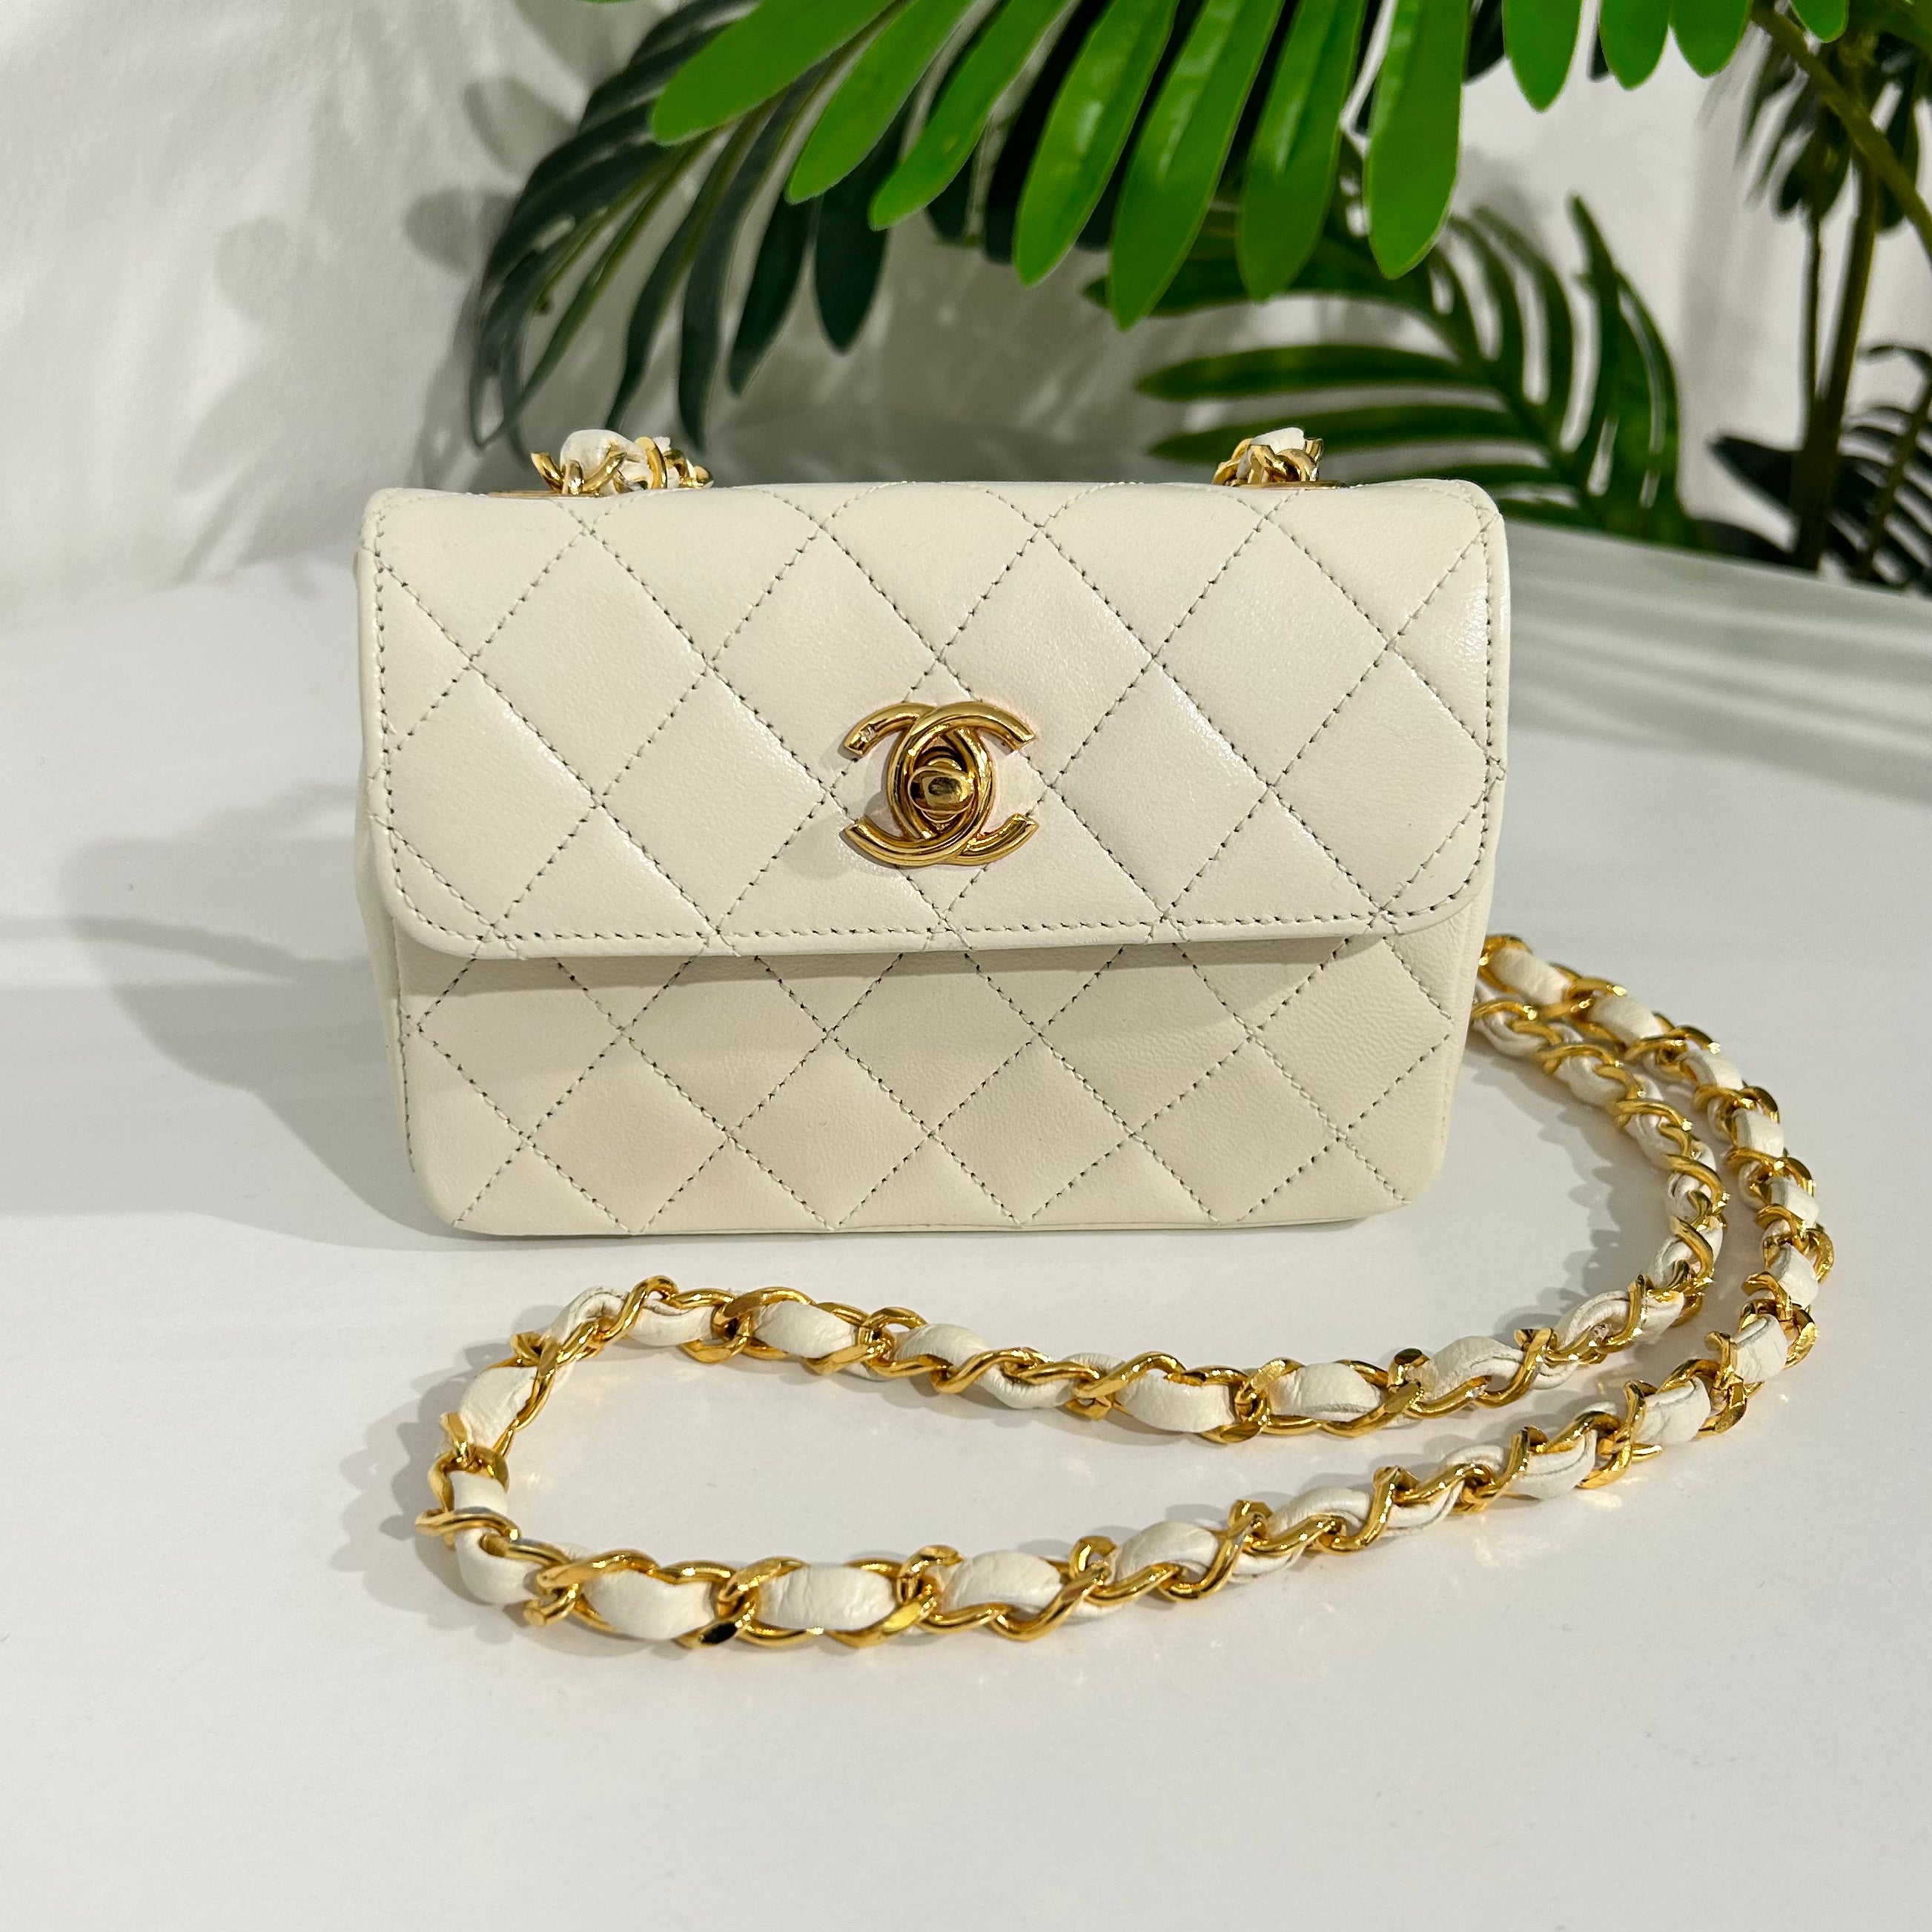 1990s Chanel White Quilted Lambskin Vintage Small Diana Classic